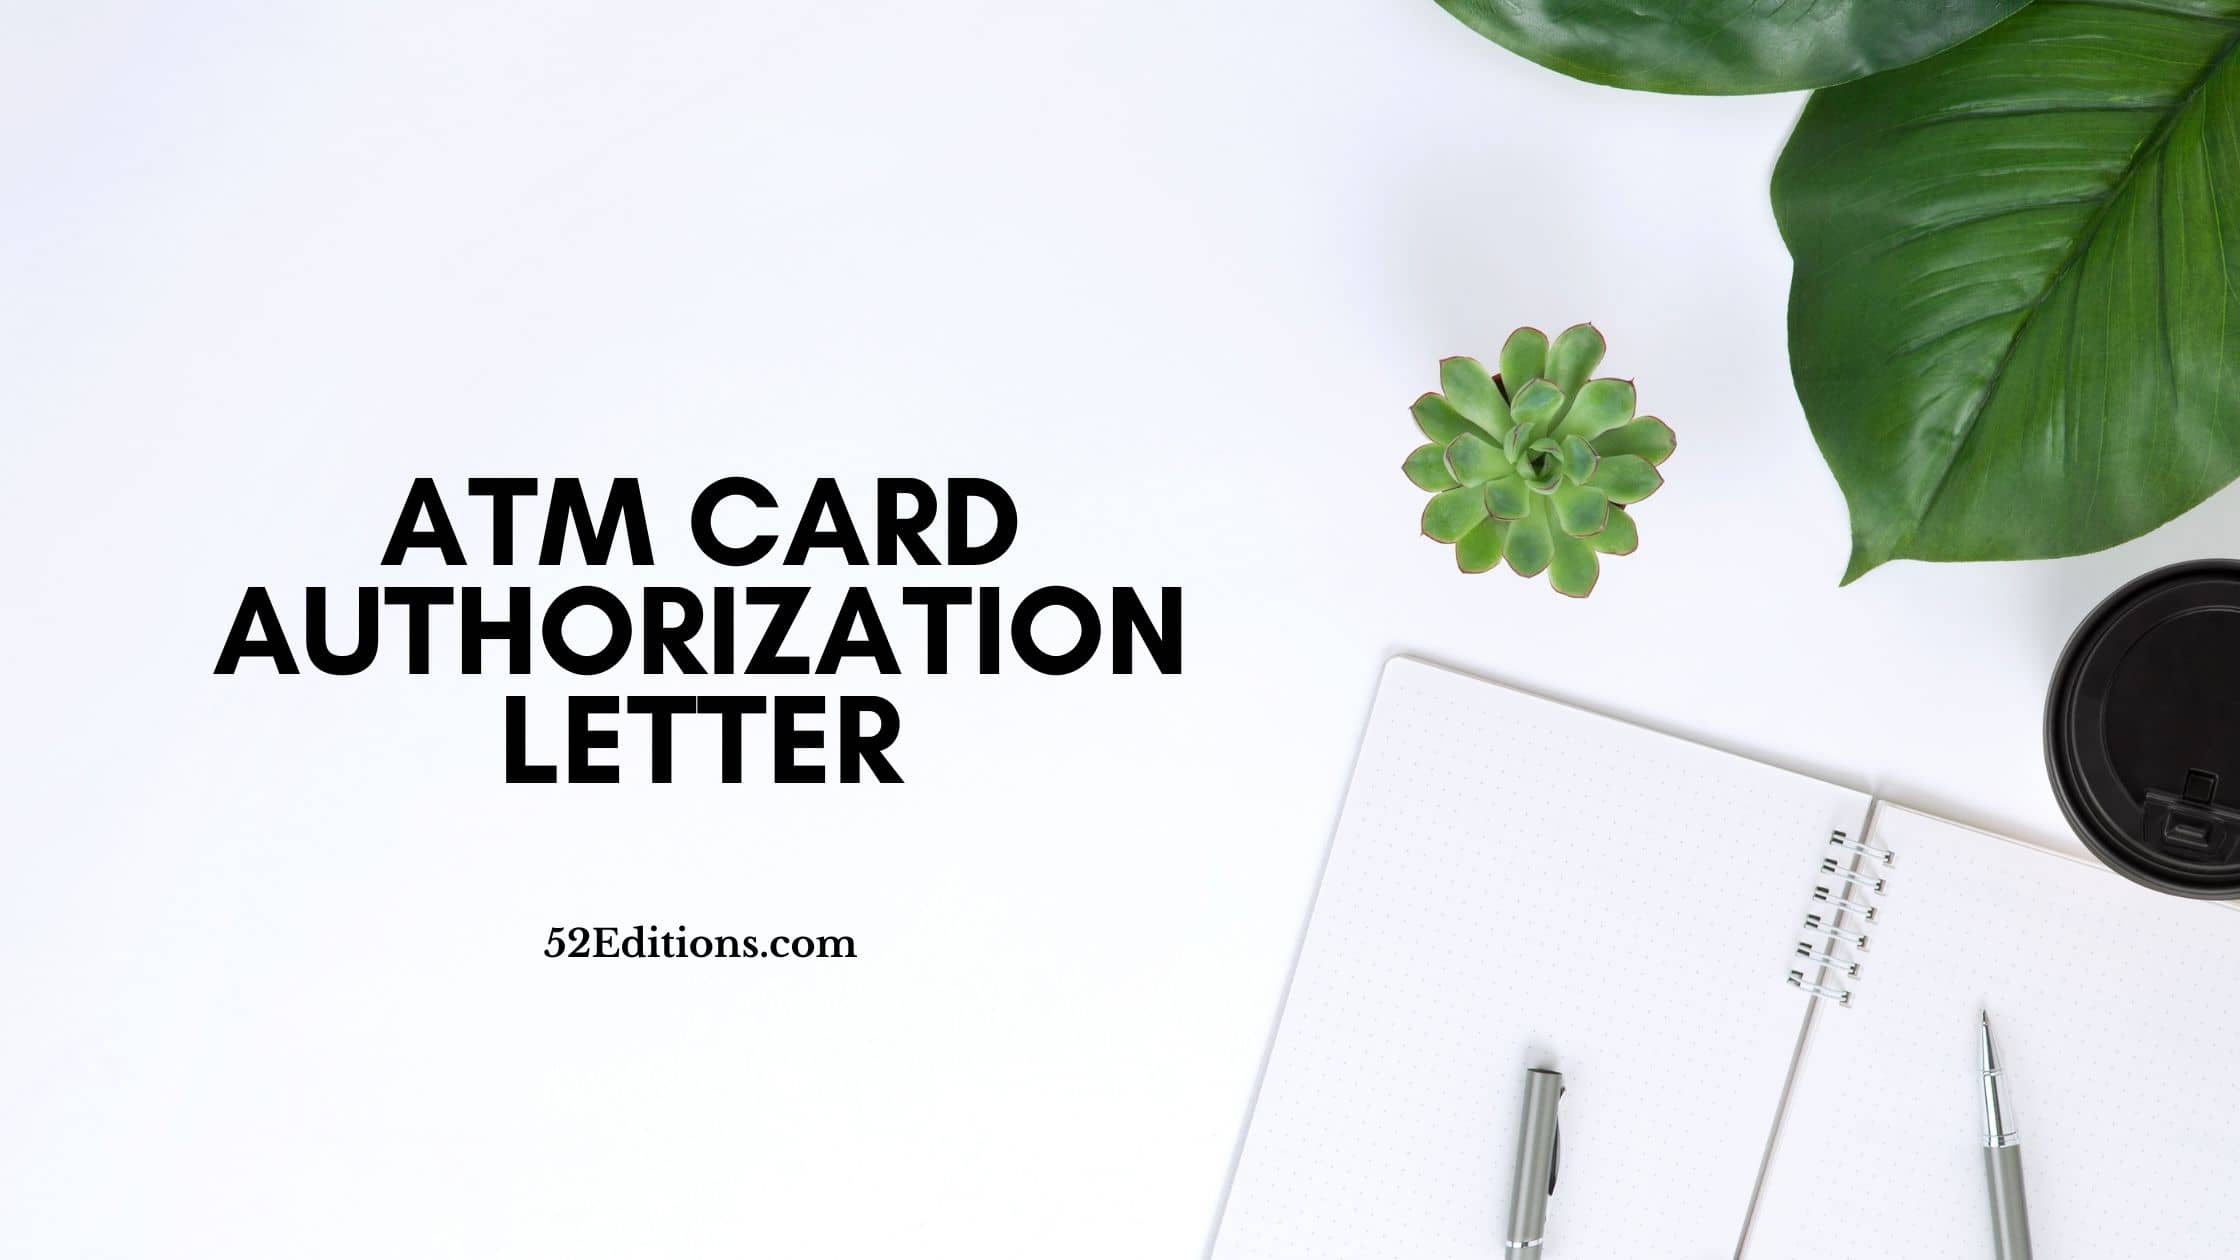 Atm Card Authorization Letter Get Free Letter Templates Print Or Download 0480